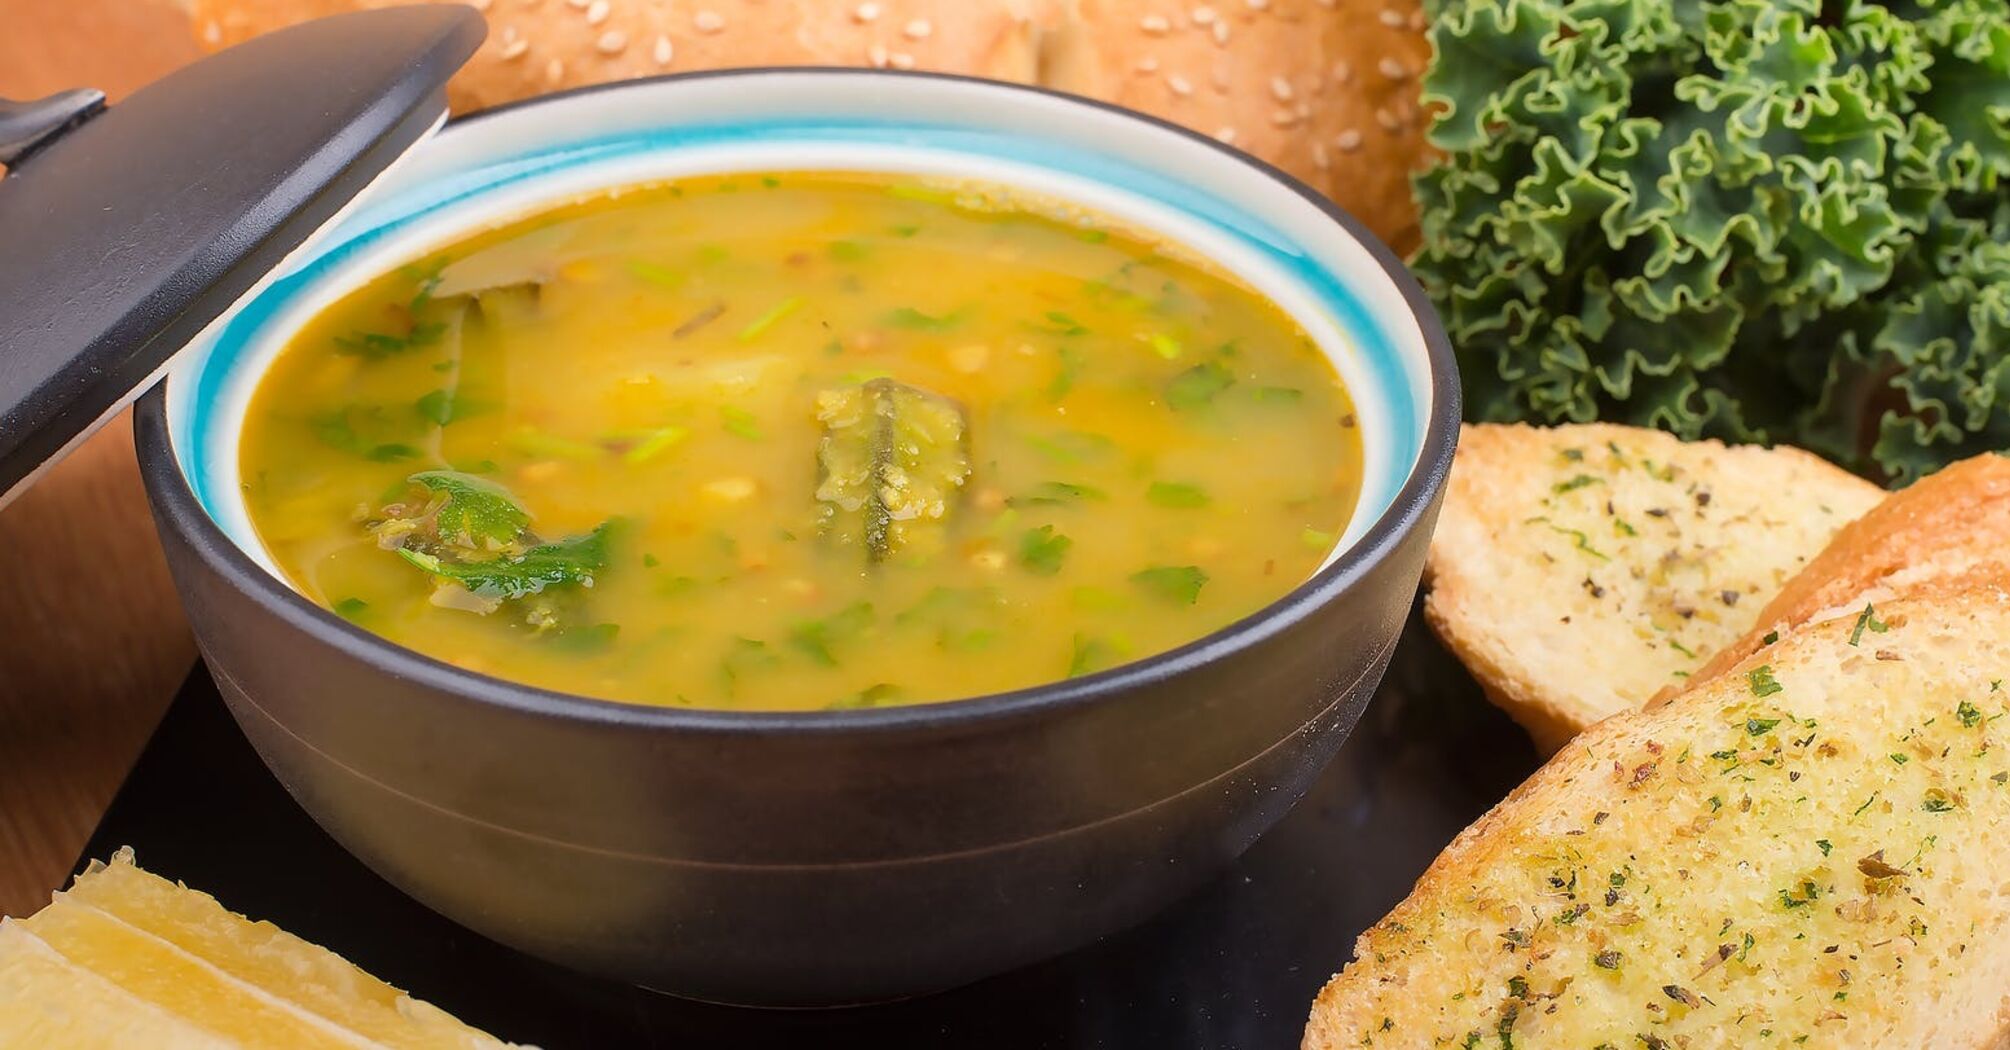 Pea soup that even children will enjoy: how to prepare 